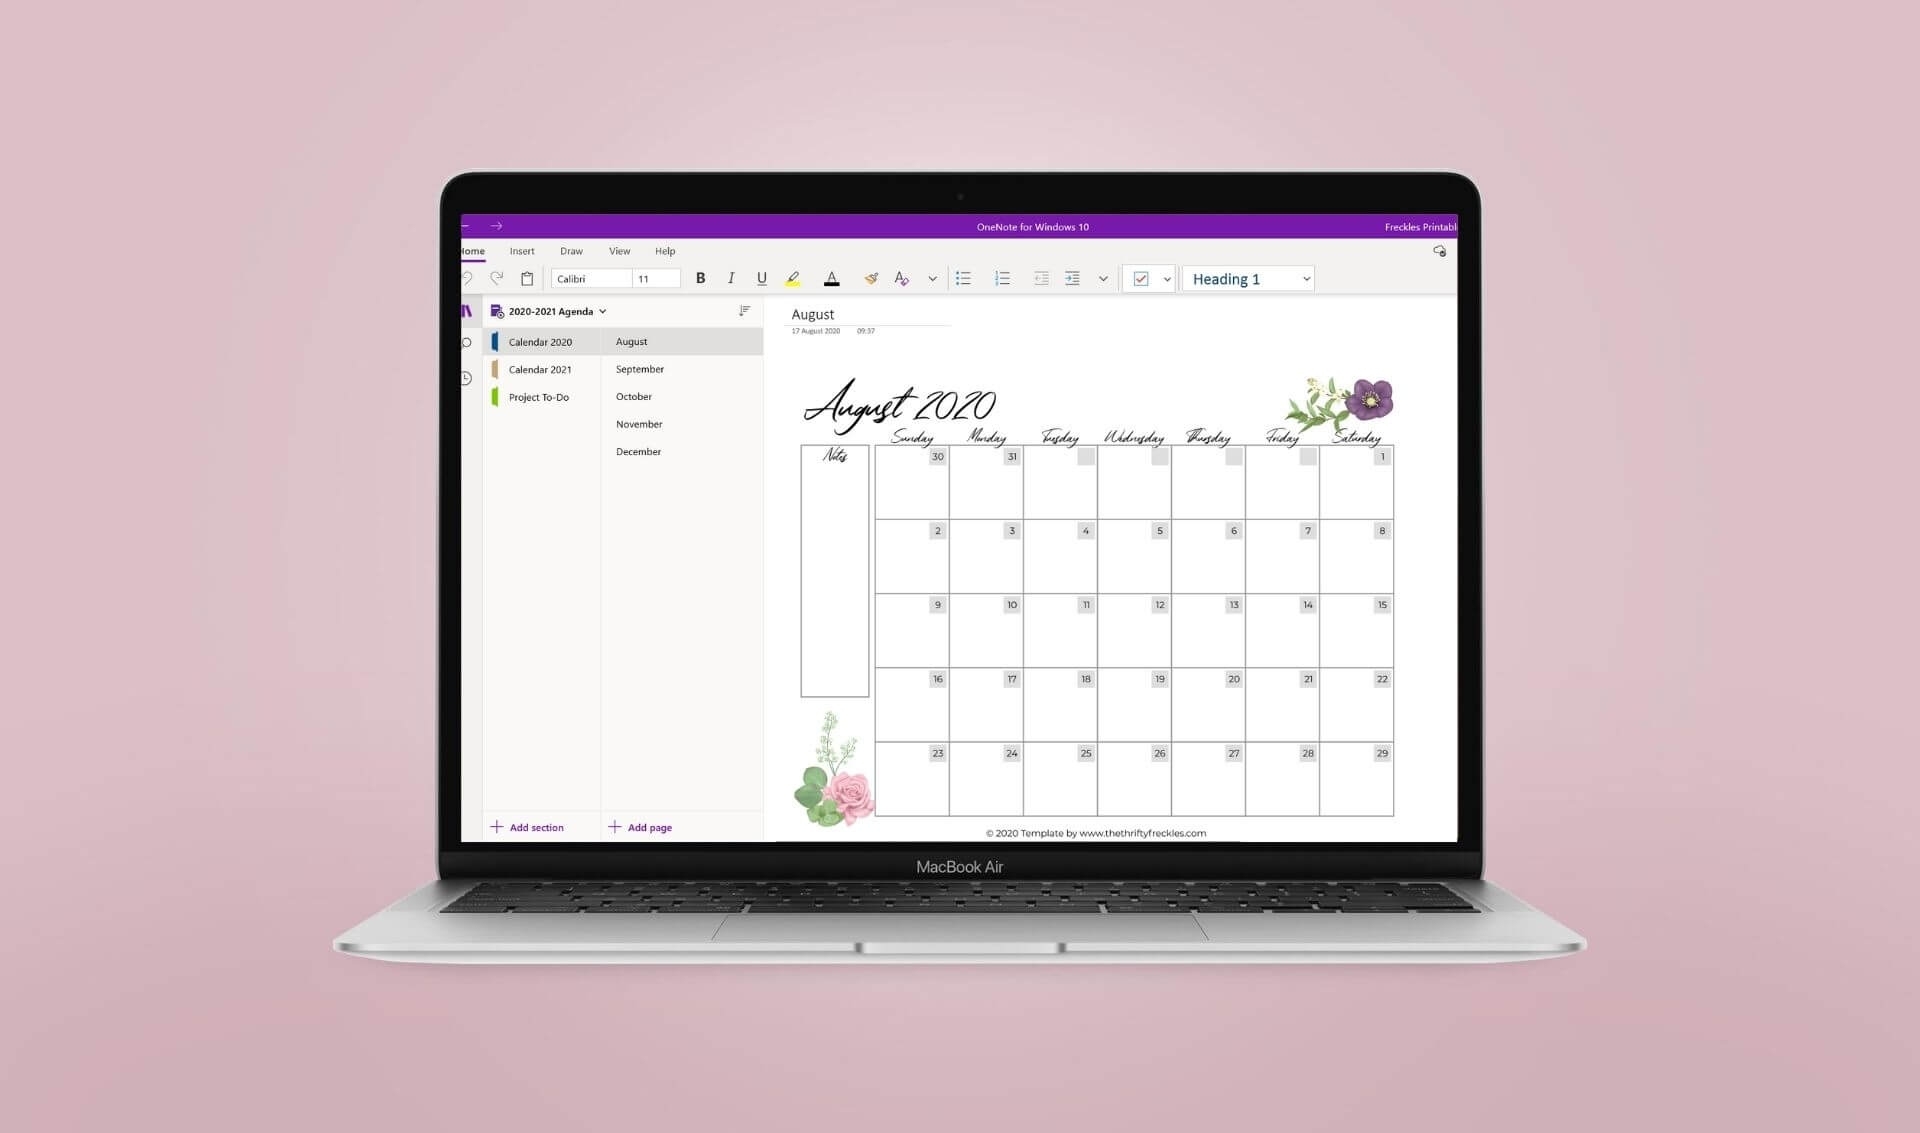 Free Onenote Template - 2020/2021 Calendar - The Thrifty Calendar Template For Onenote